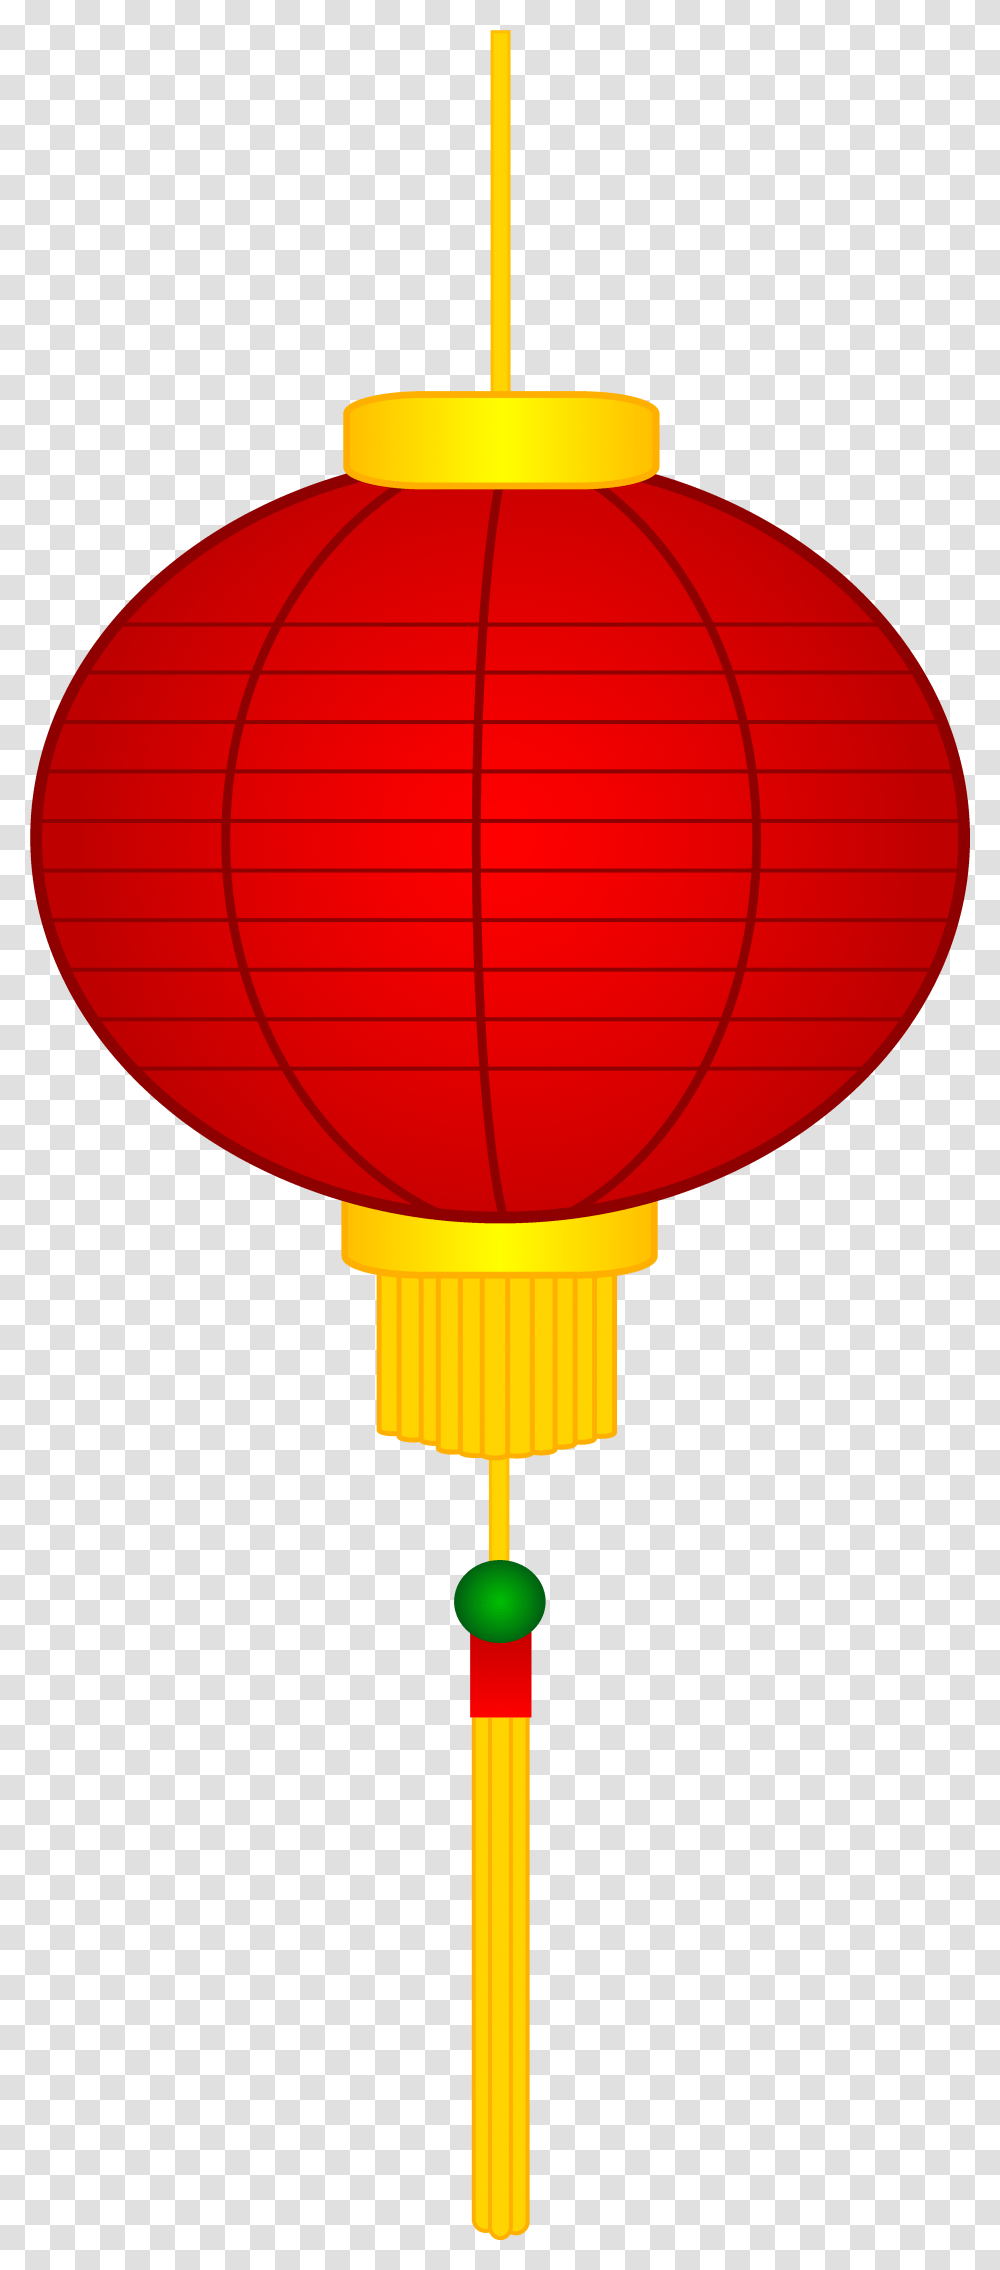 Chinese Lantern Clipart Background Clipartfest Red Chinese Lantern Clip Art, Lamp, Hot Air Balloon, Aircraft, Vehicle Transparent Png